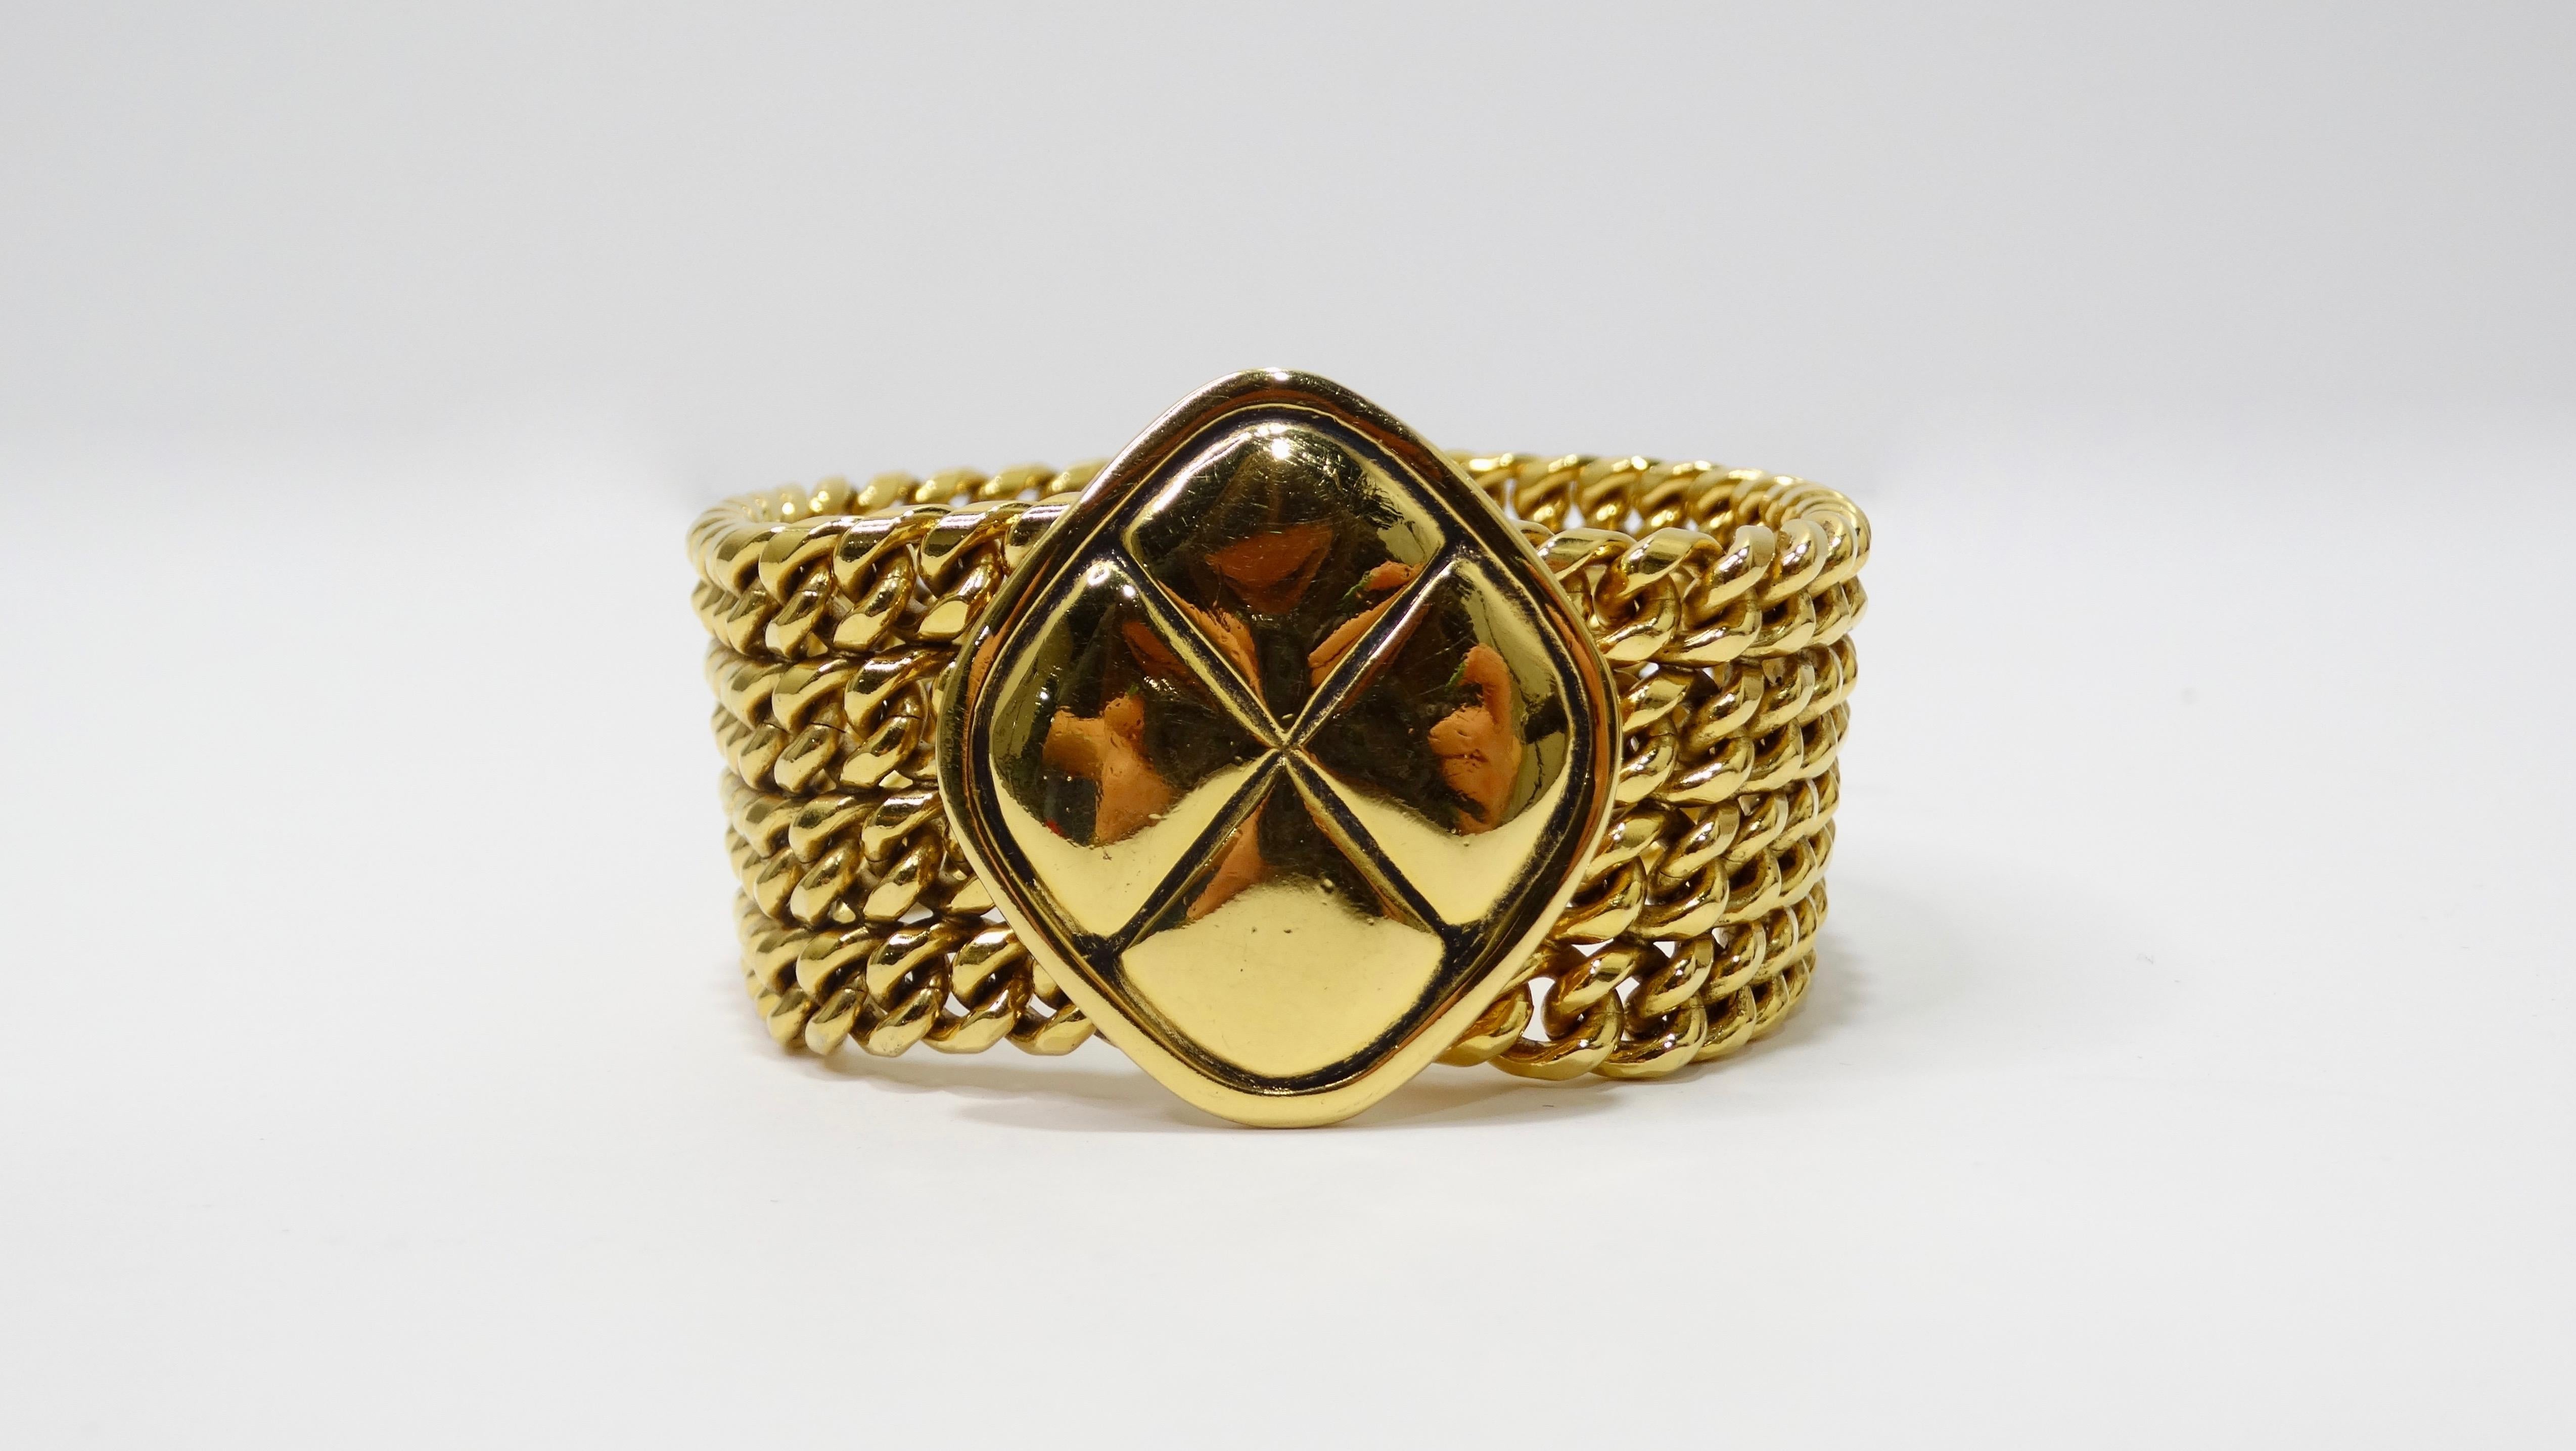 Stay lucky with this timeless Chanel bracelet! Circa 1970s, this gold toned multi-chain bracelet features a four leaf clover pendant with a hook and eye closure. Chanel was very superstitious and she often surrounded herself with lucky charms and